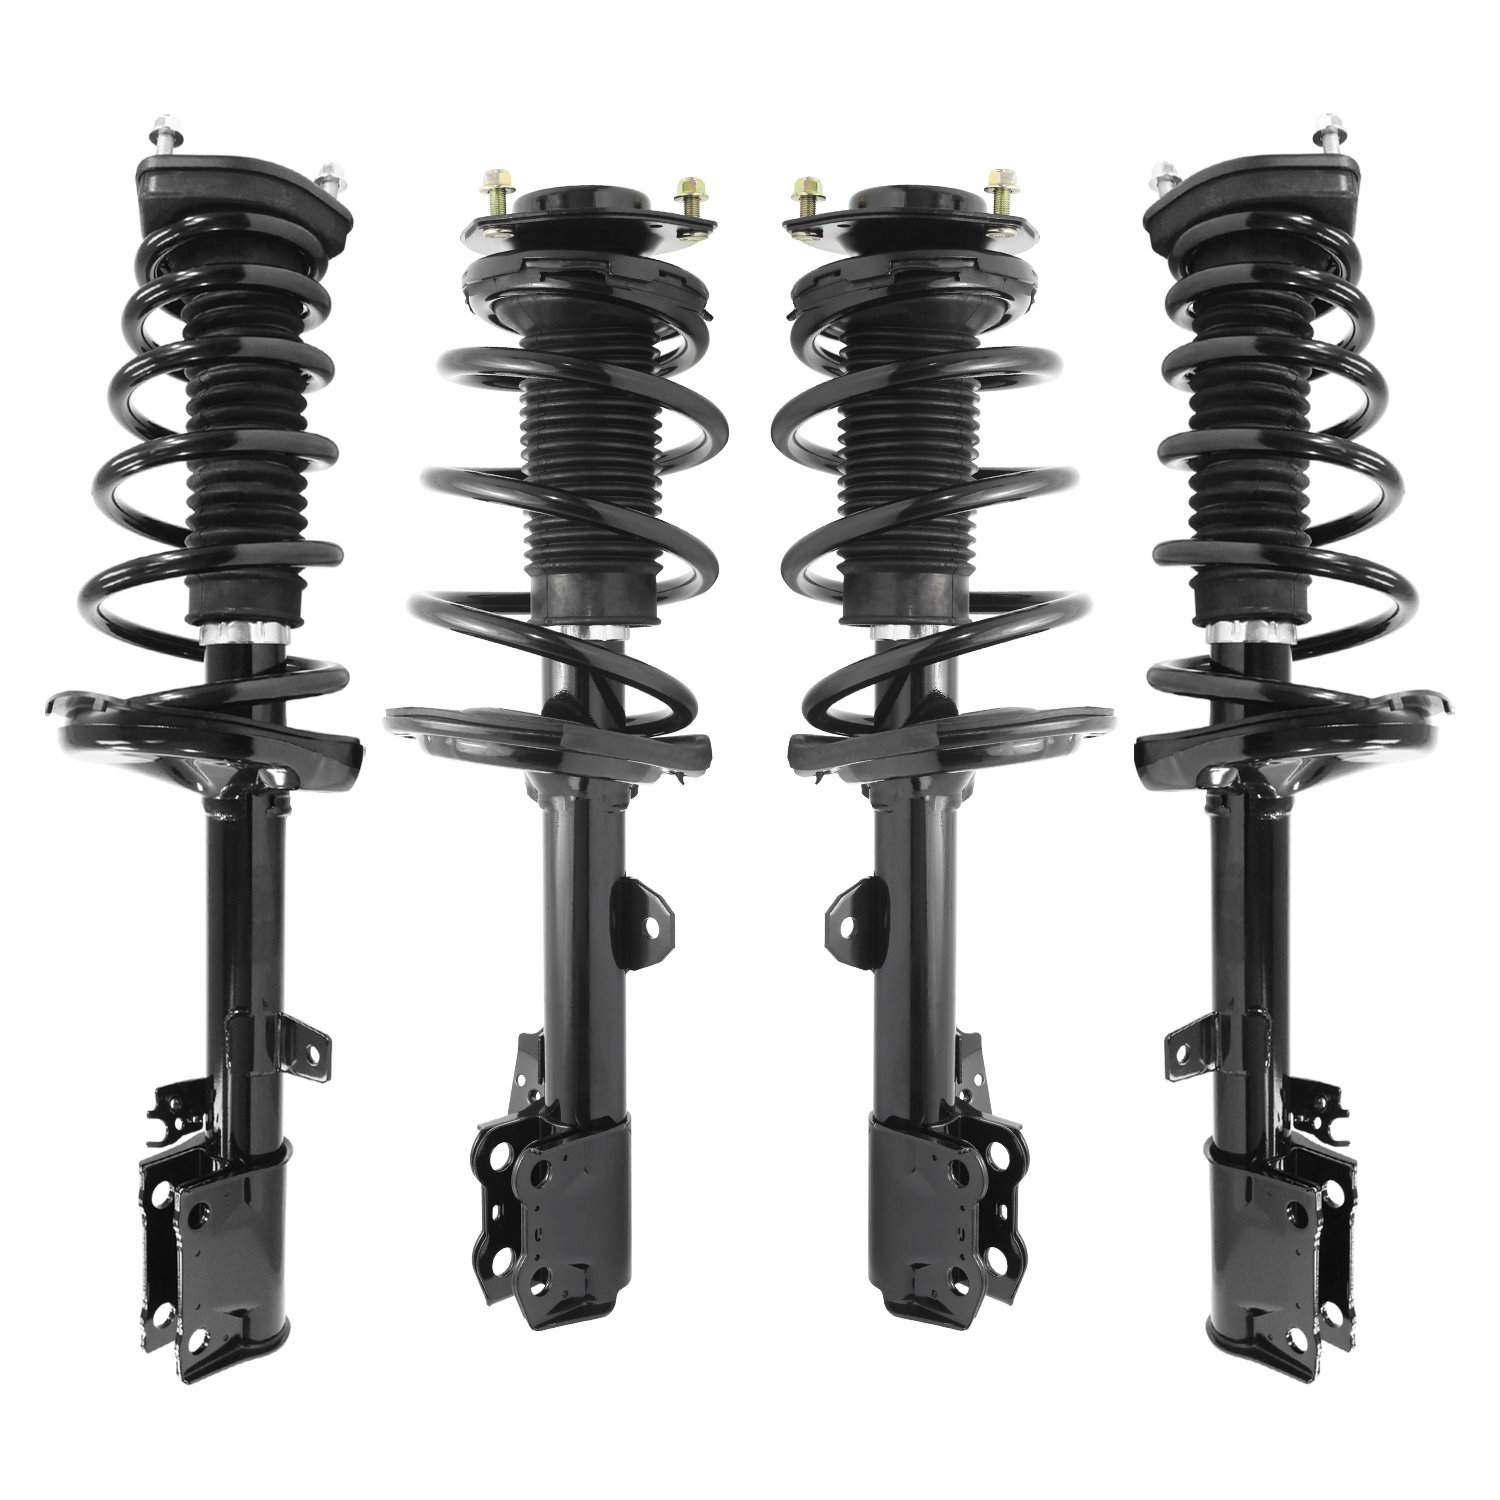 4-11935-15413-001 Front & Rear Suspension Strut & Coil Spring Assembly Kit Fits Select Toyota Venza